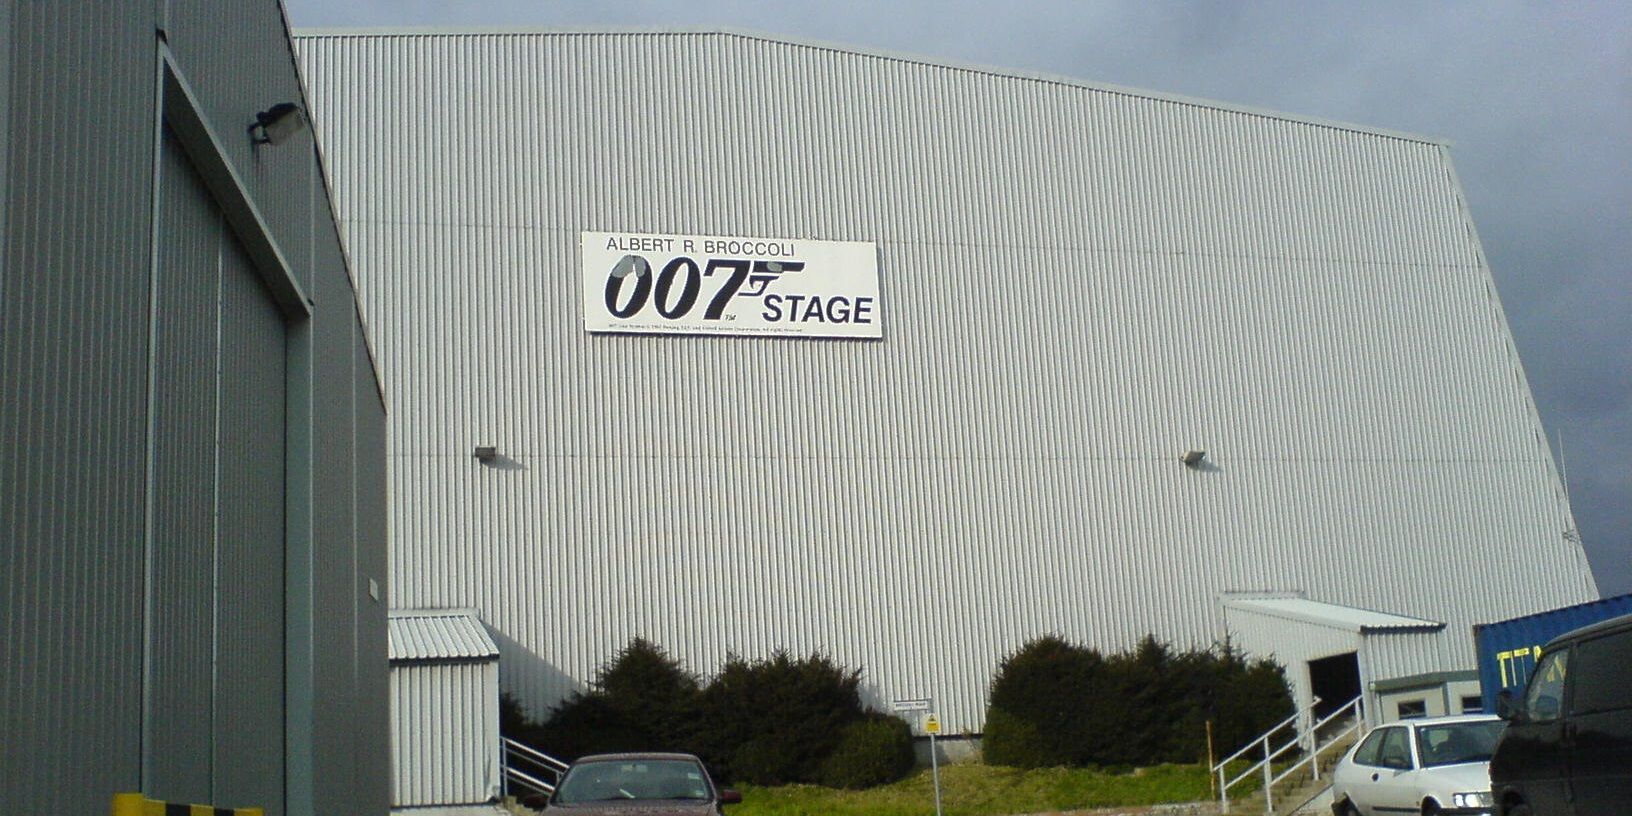 The 007 Stage at Pinewood Studios